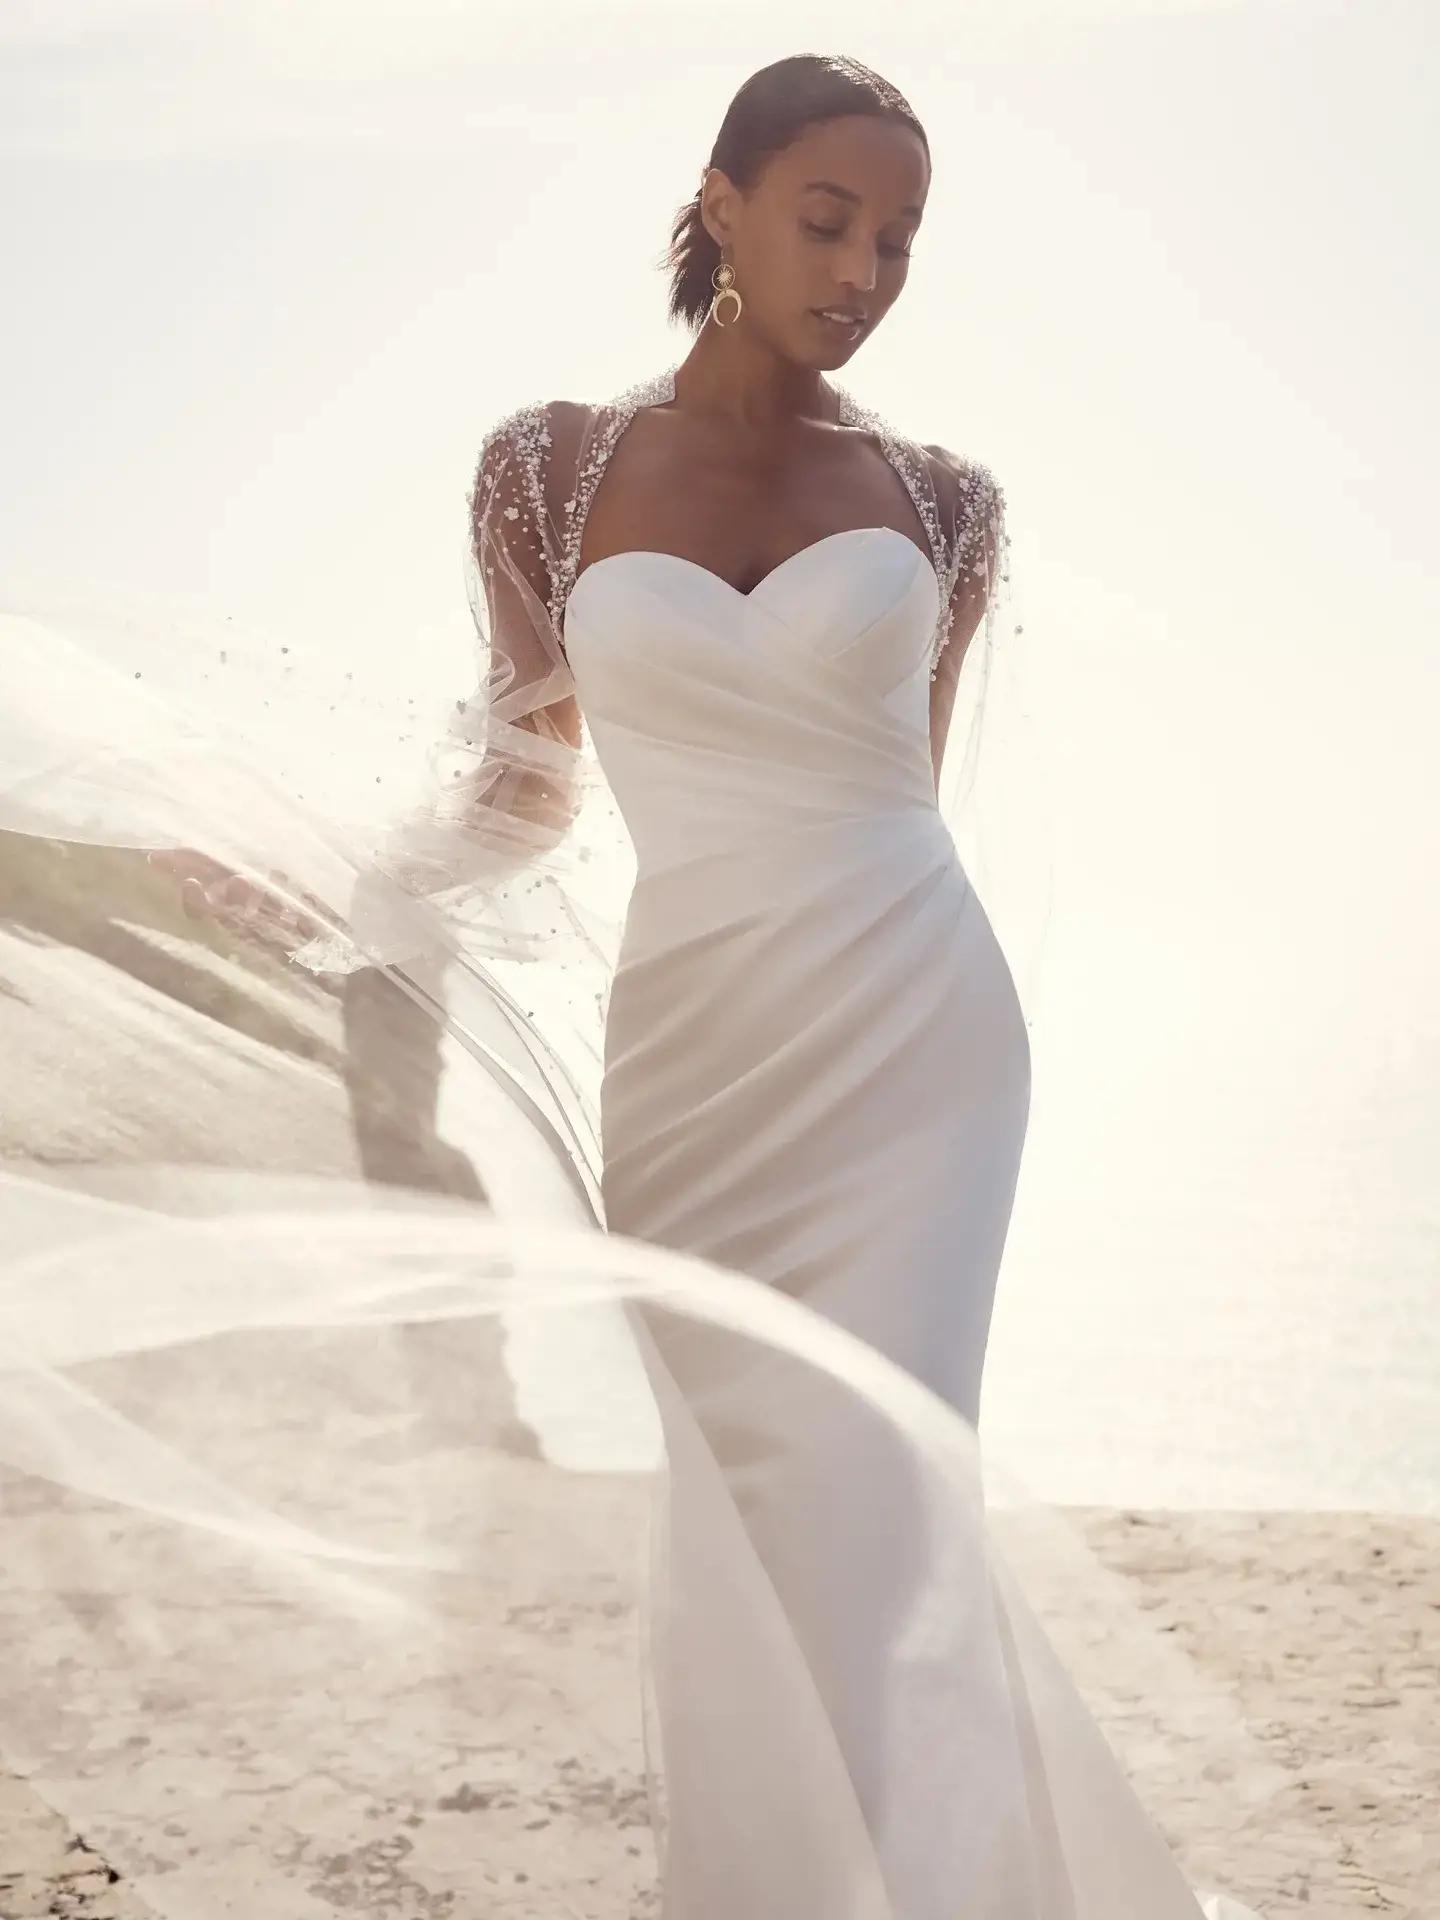 Find Your Dream Wedding Dress With Serendipity Bridal Image